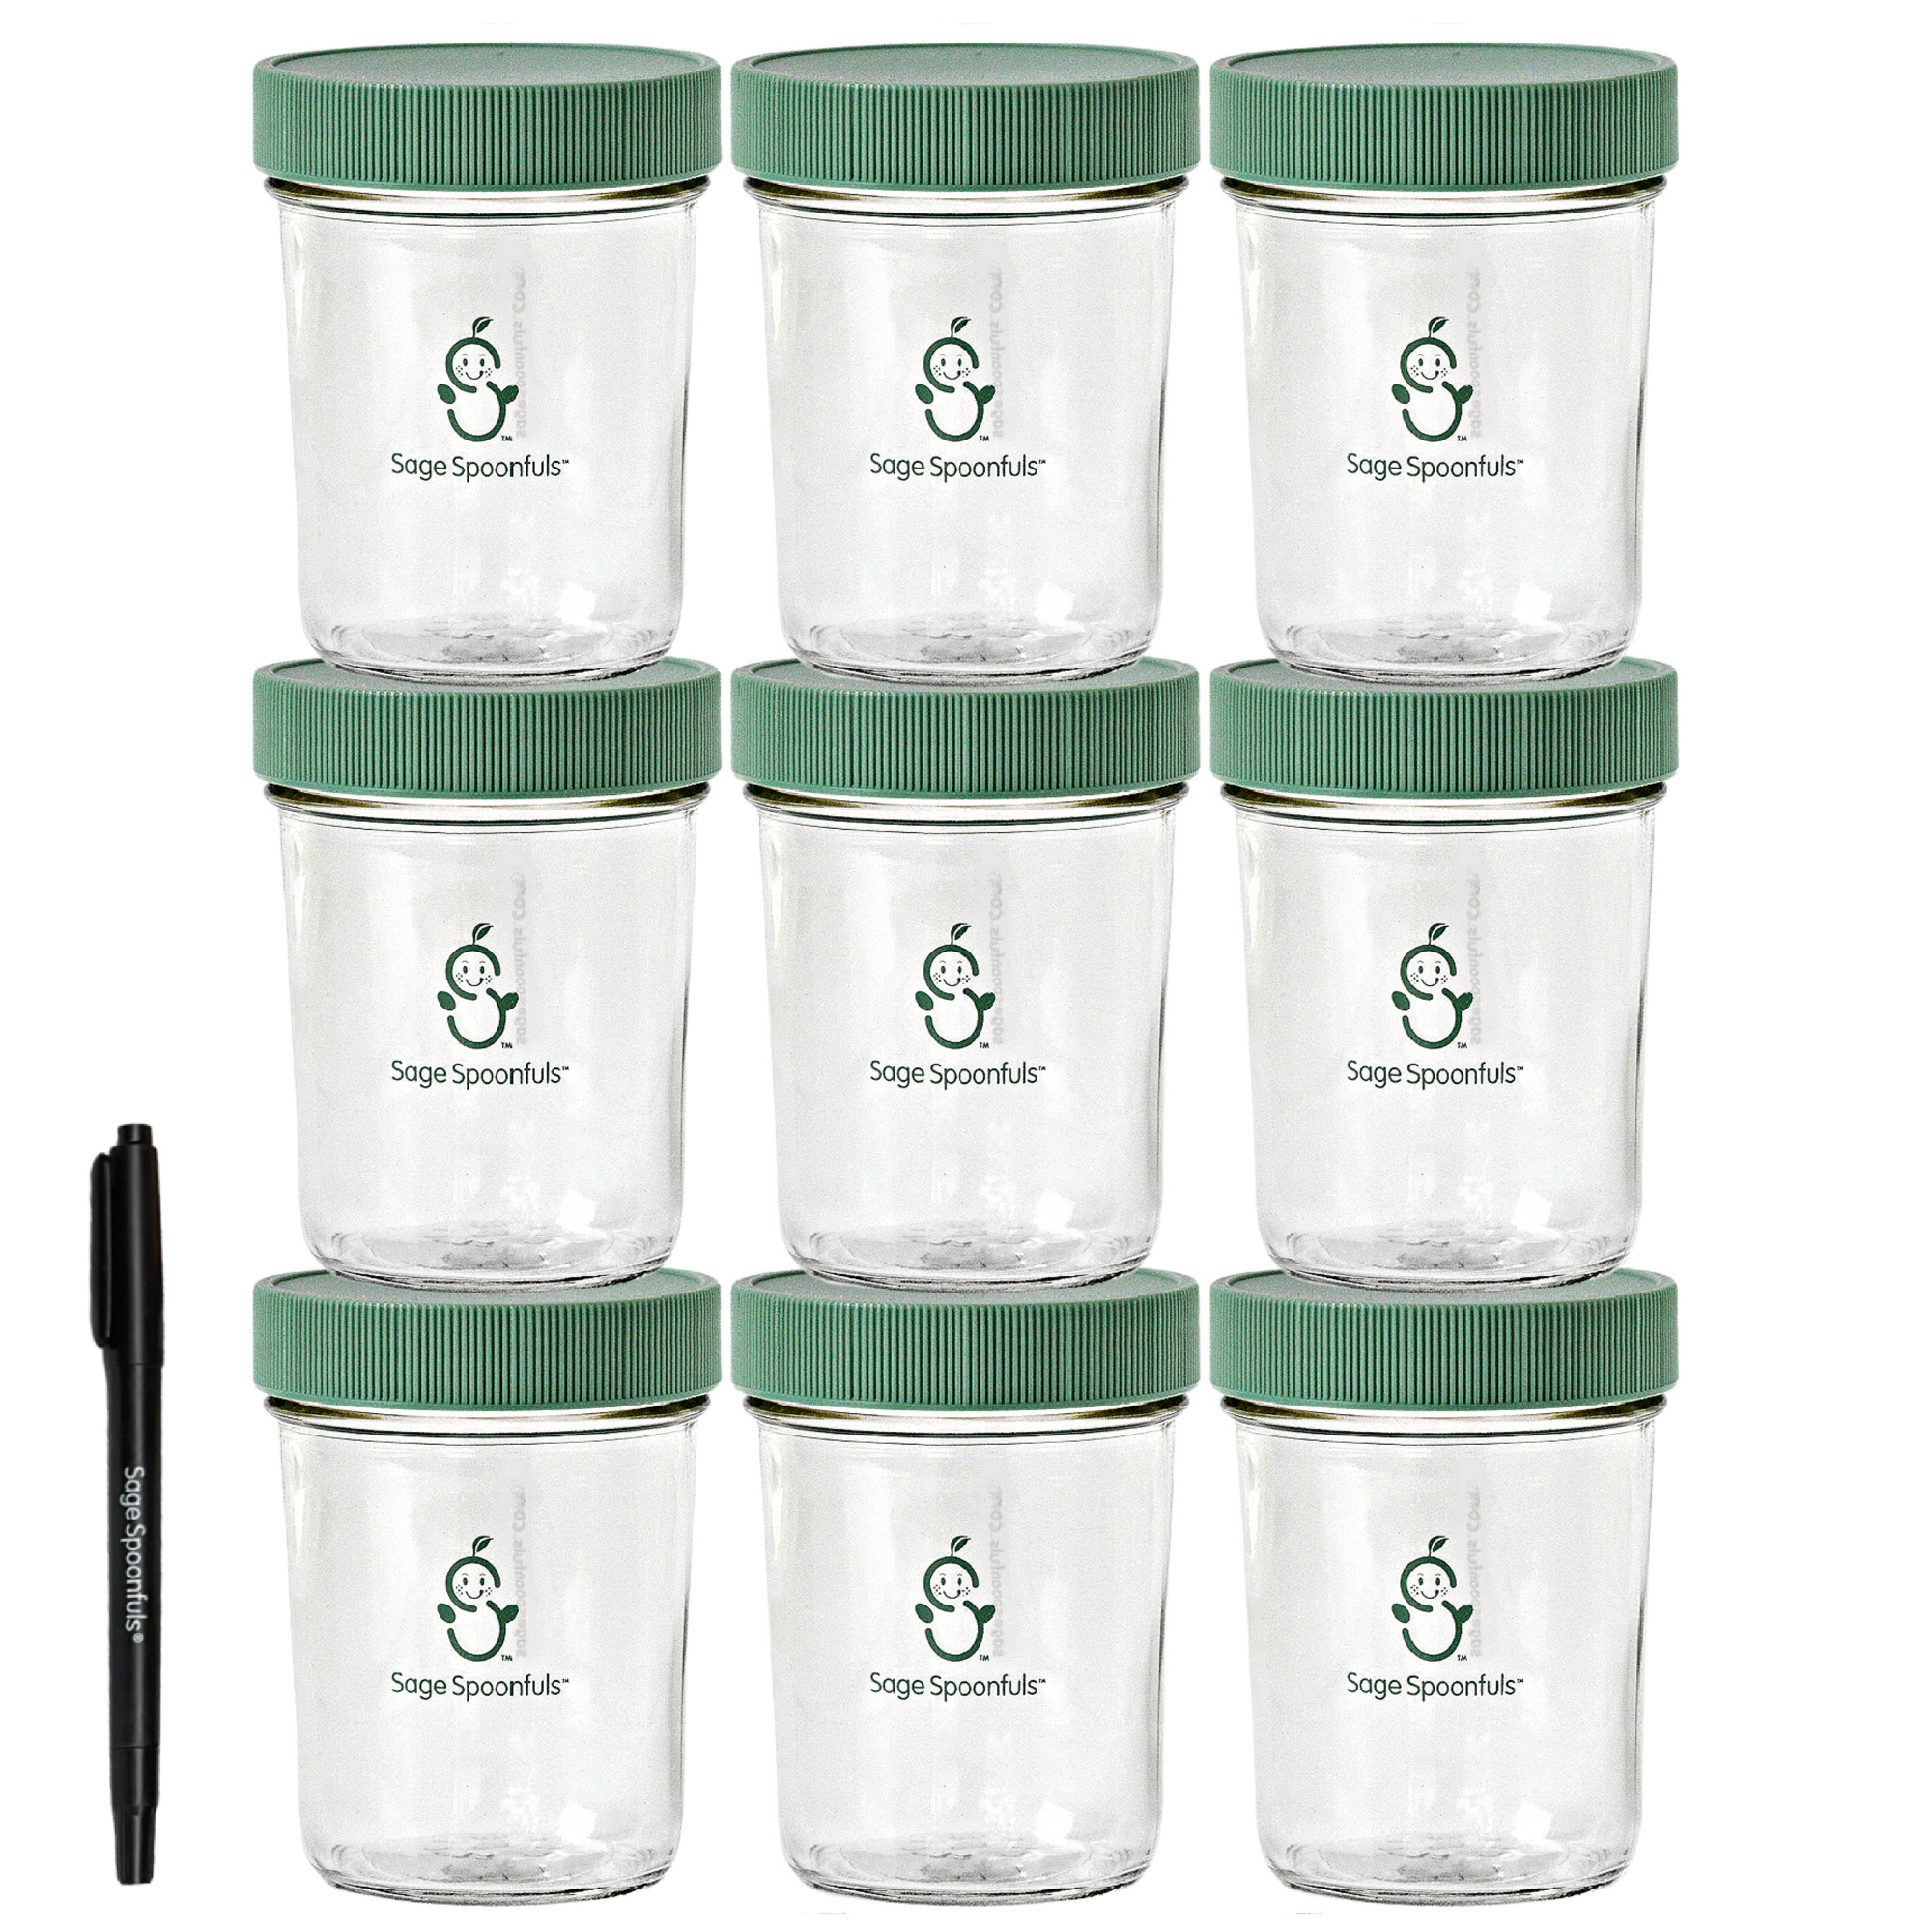 Acorn Baby Food Containers 8 Pack - 8oz Glass Jar Small Containers